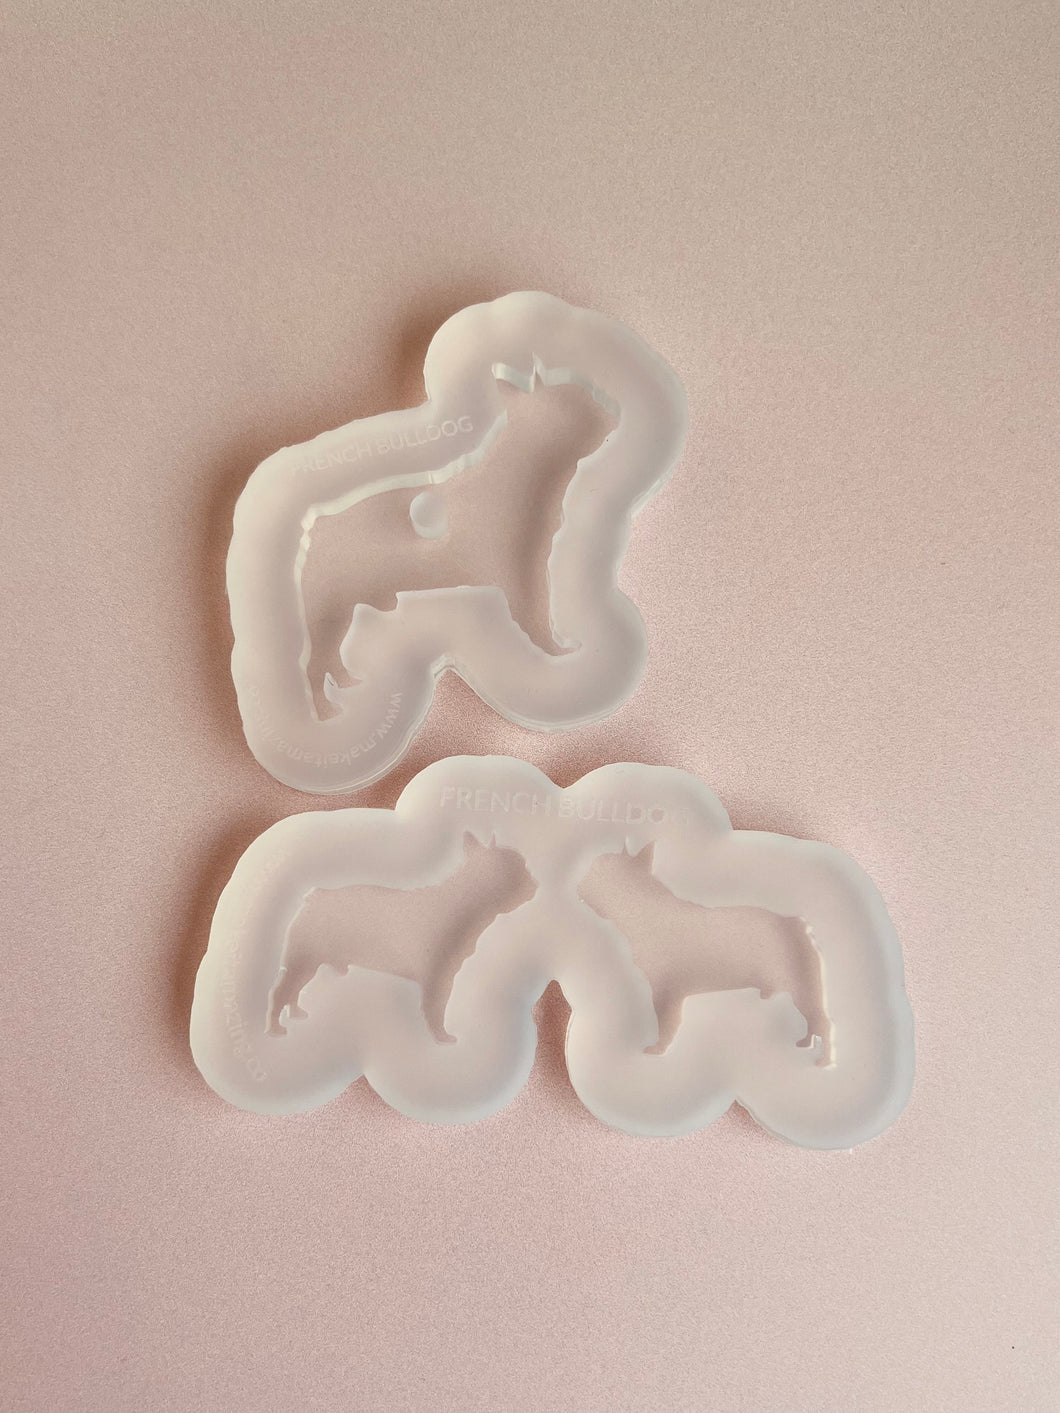 French Bulldog silhouette dog silicone mould